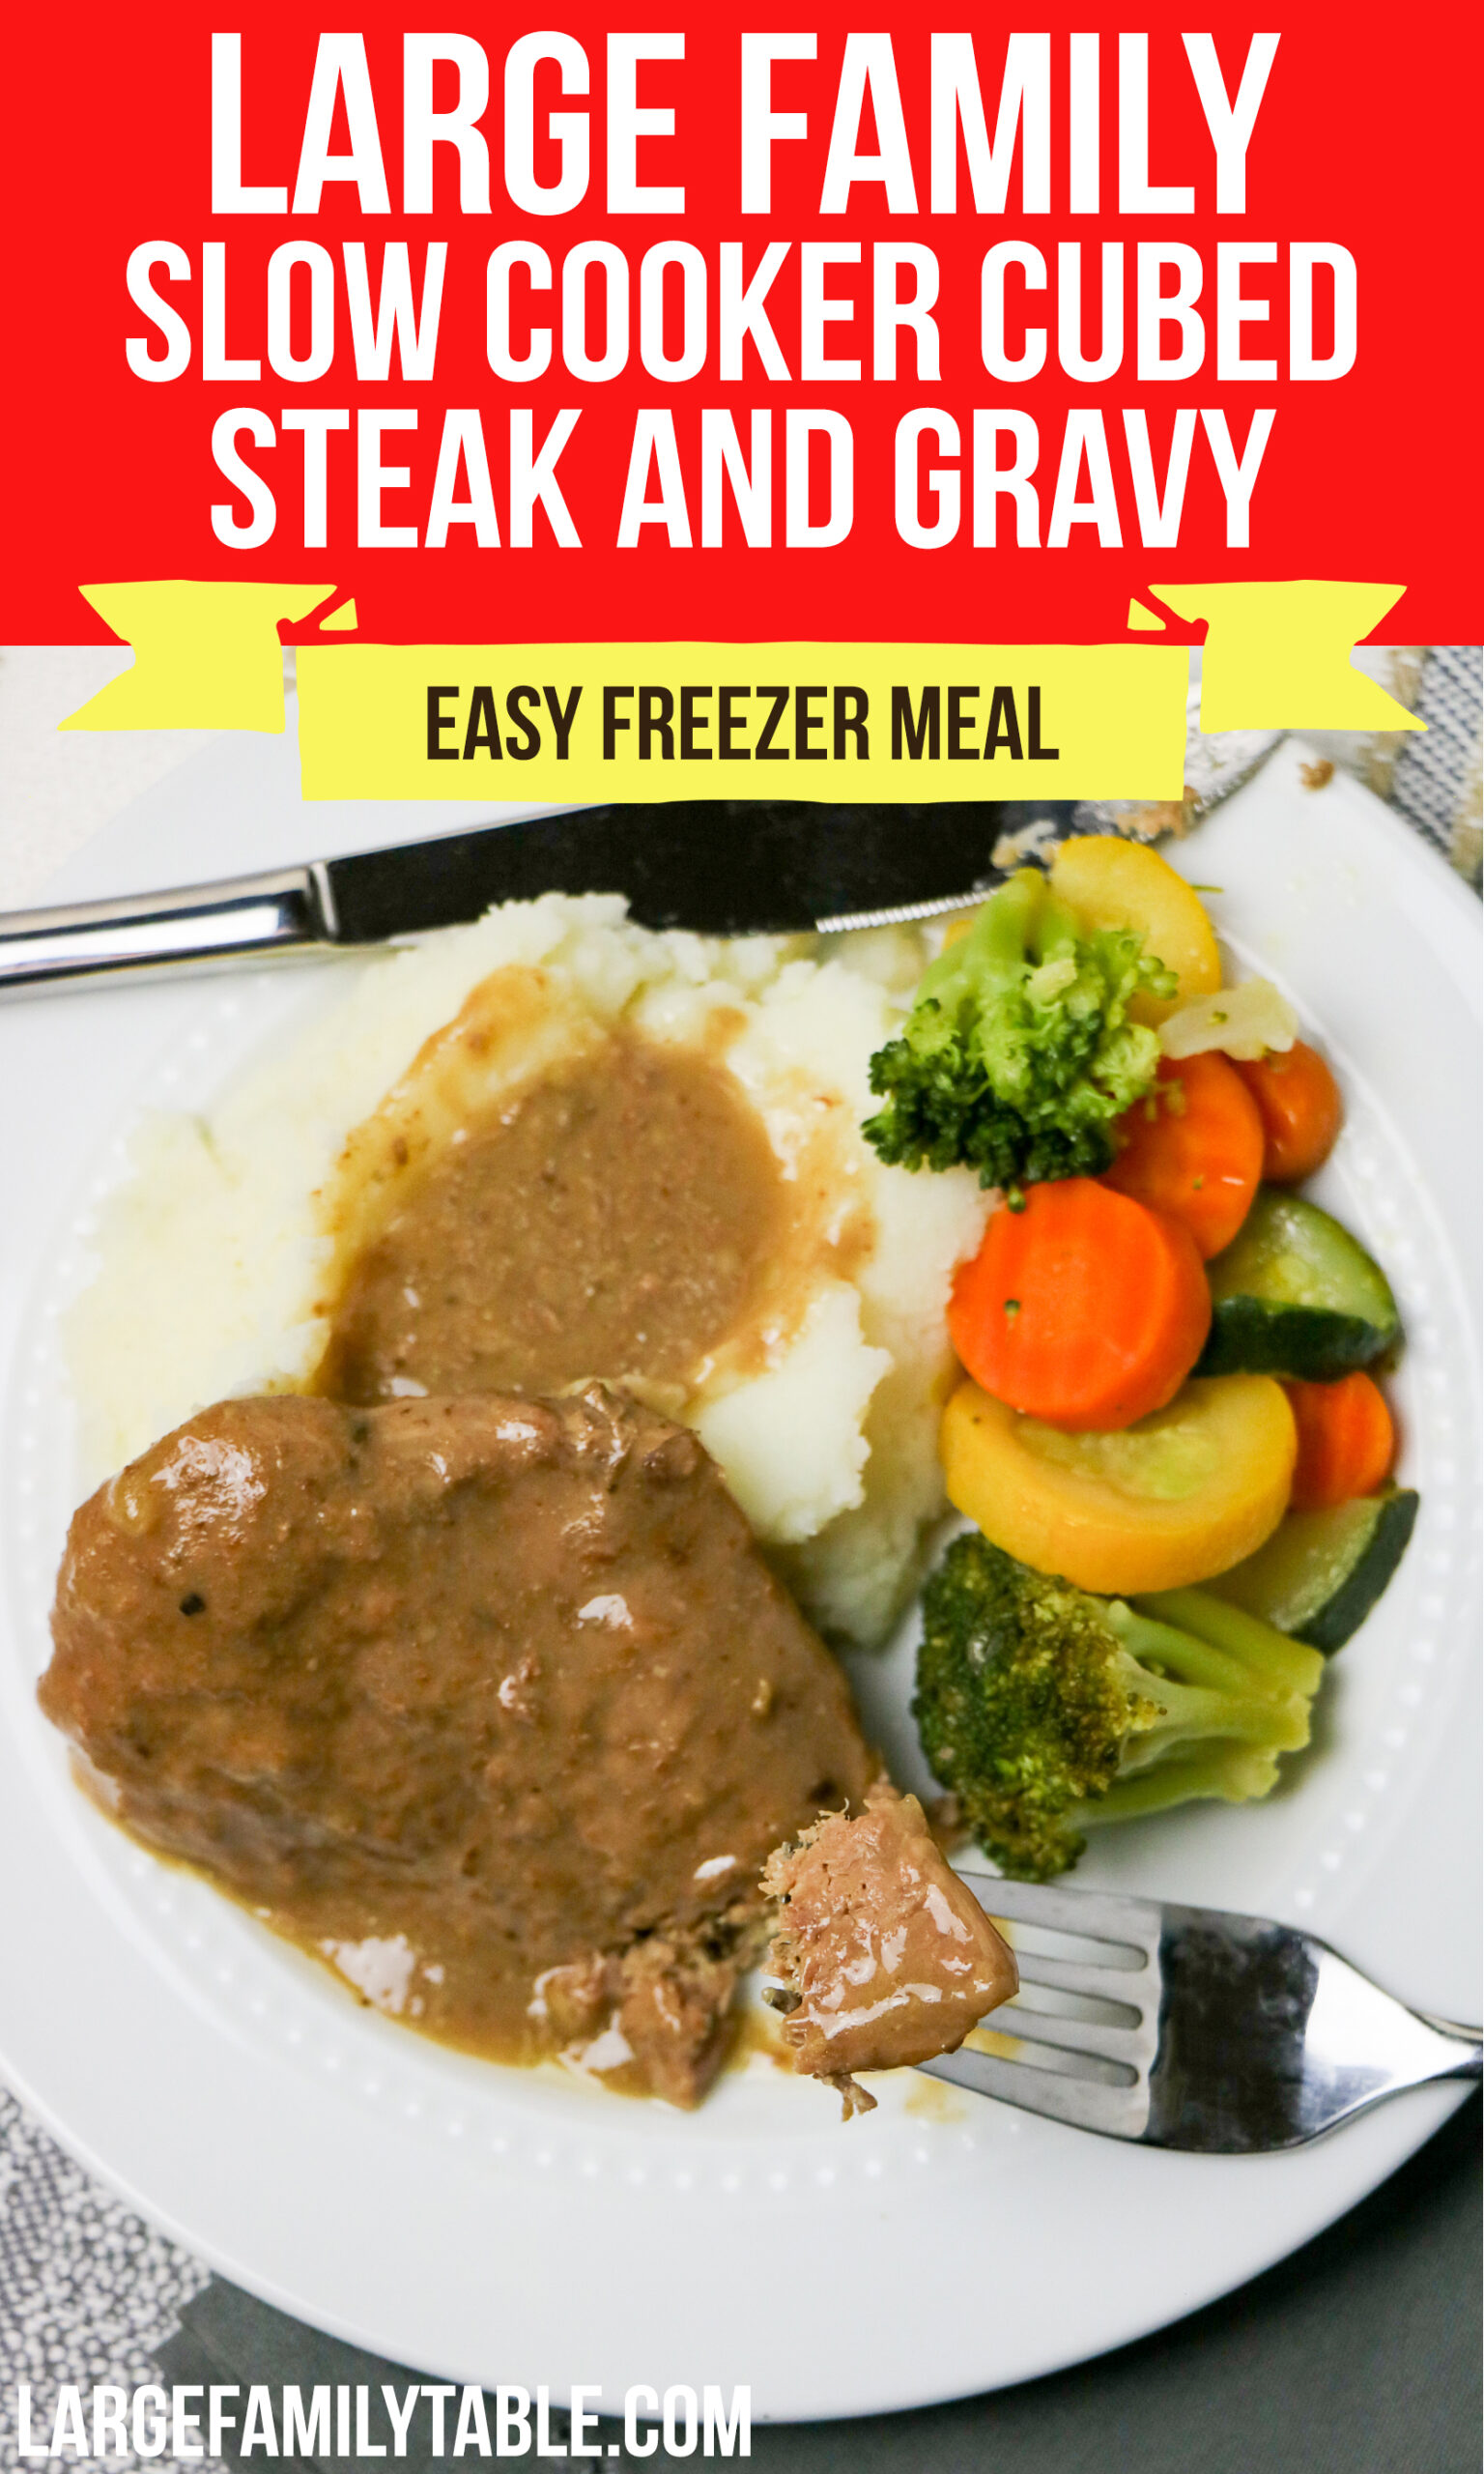 Large Family Slow Cooker Cubed Steak and Gravy